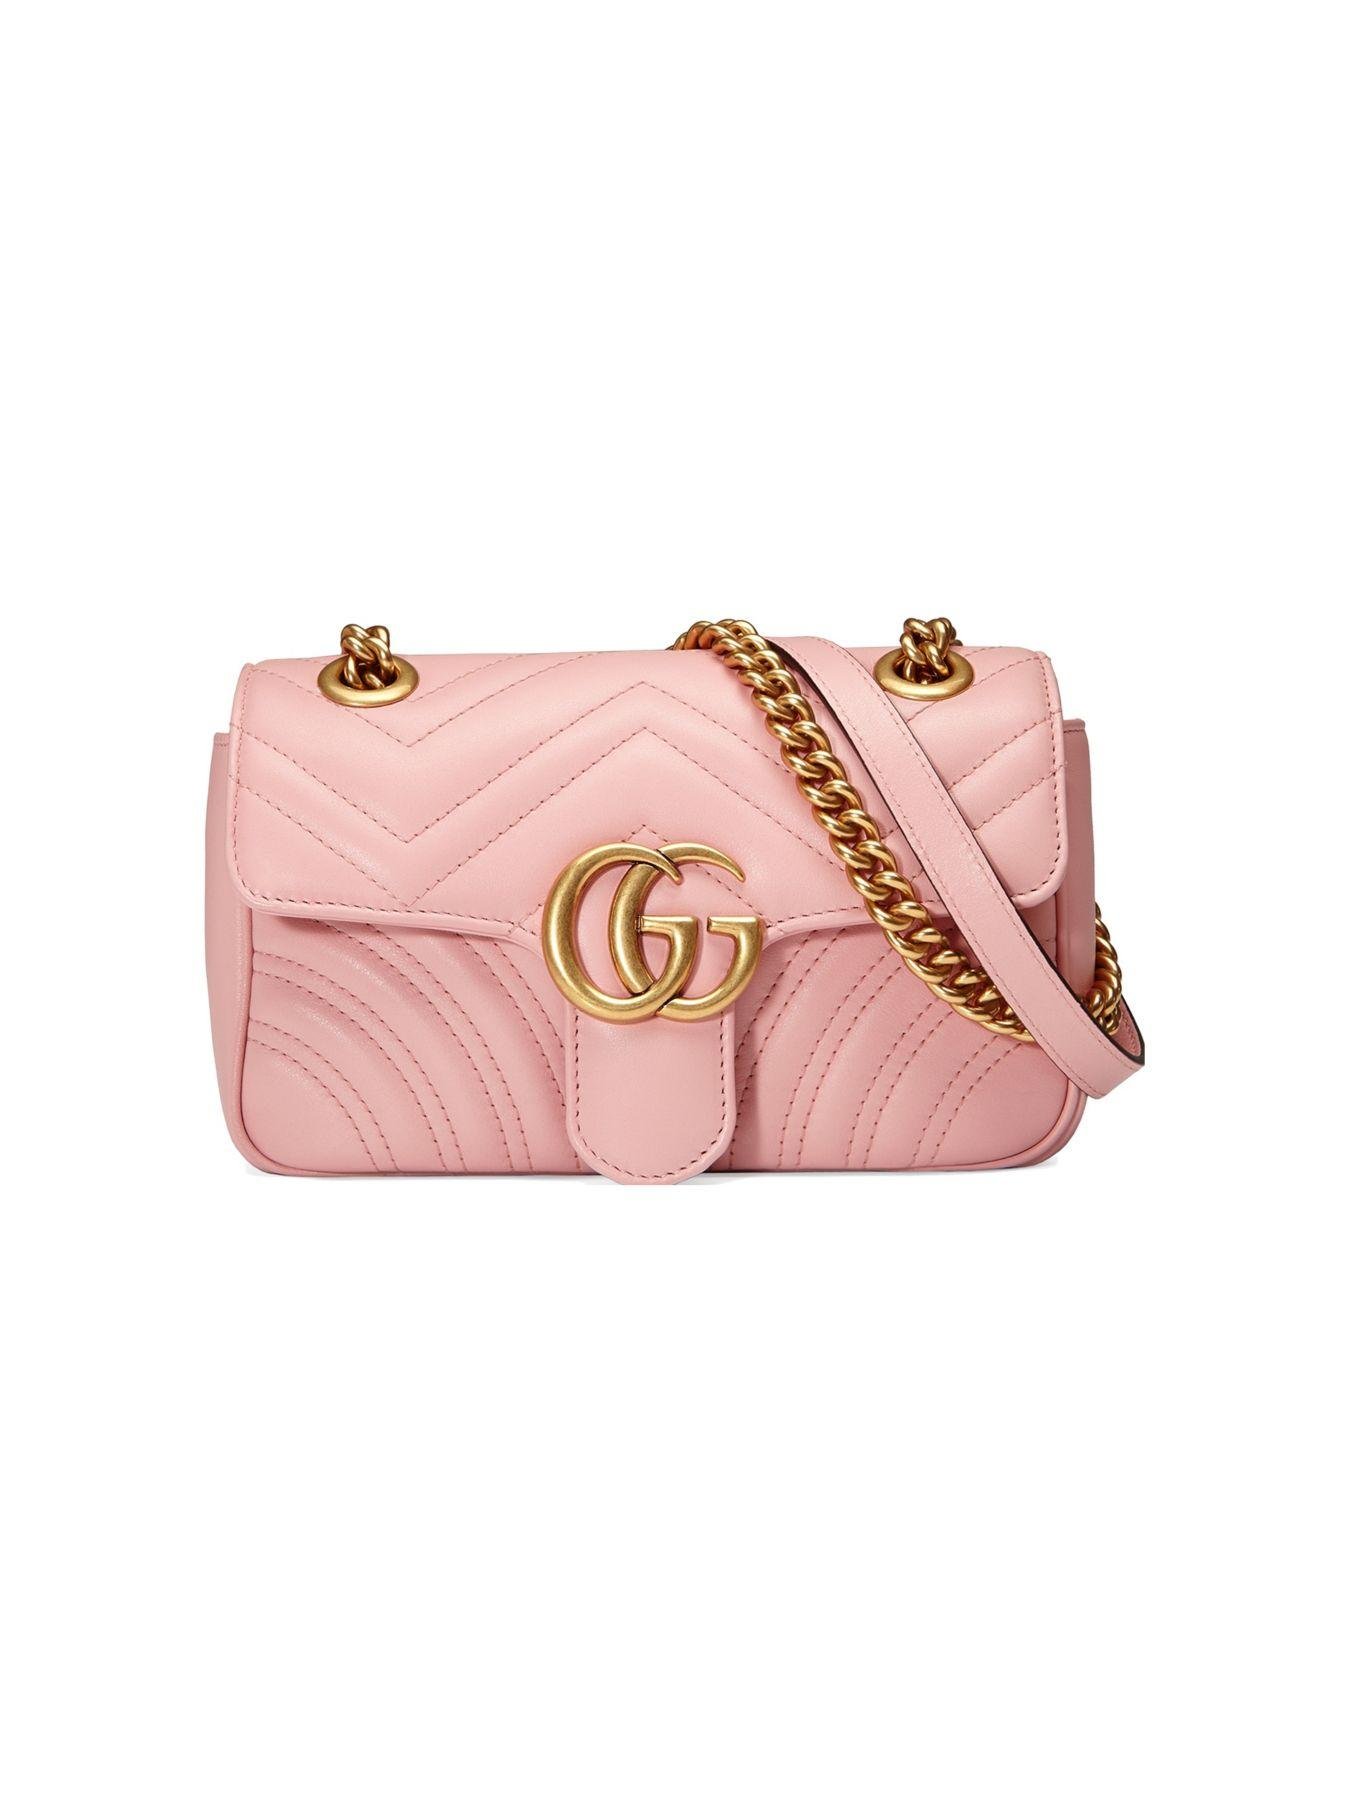 Gucci Synthetic GG Marmont Matelassé Mini Bag in Pink | Lyst